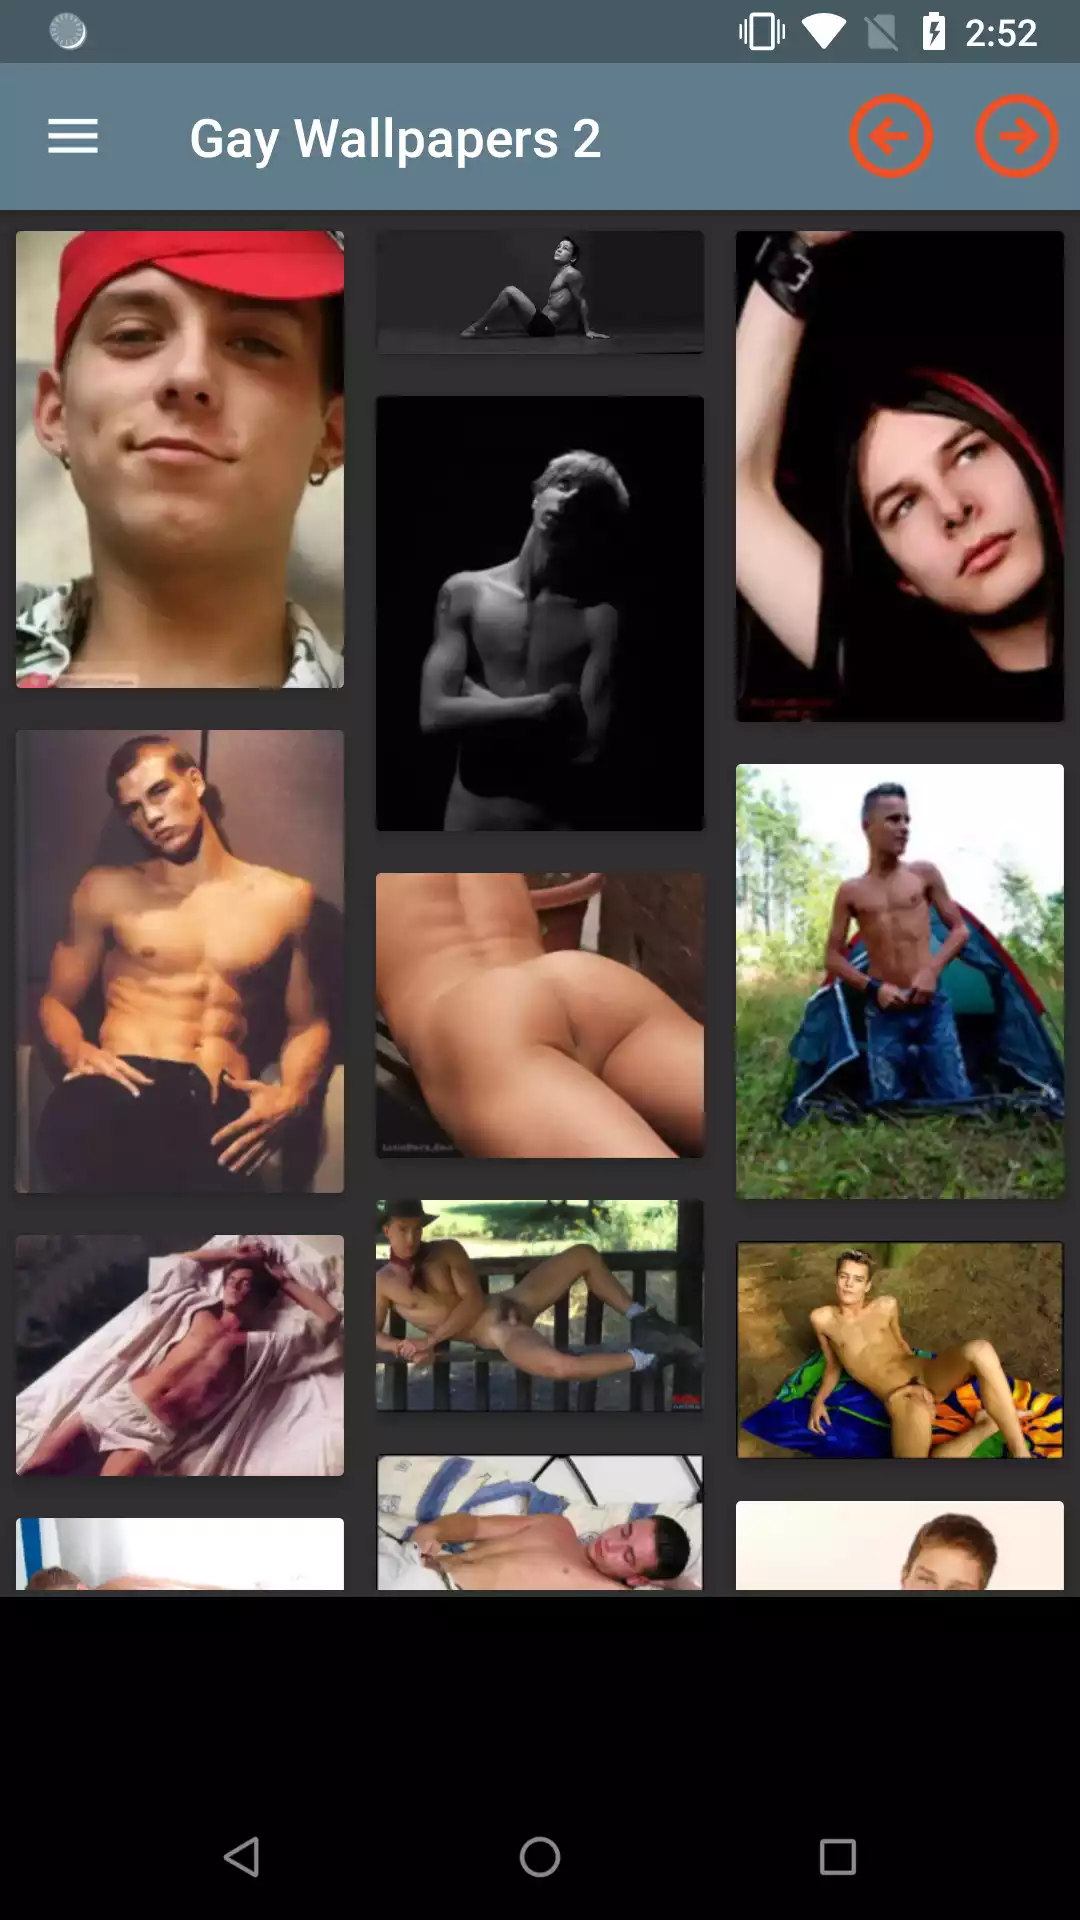 Gay Wallpapers app,latest,hentai,pornstar,pics,fuck,hentie,sexy,feast,demonic,apps,backgrounds,gay,wallpapers,hot,comic,apk,gallery,pic,download,mythras,photo,men,pictures,lair